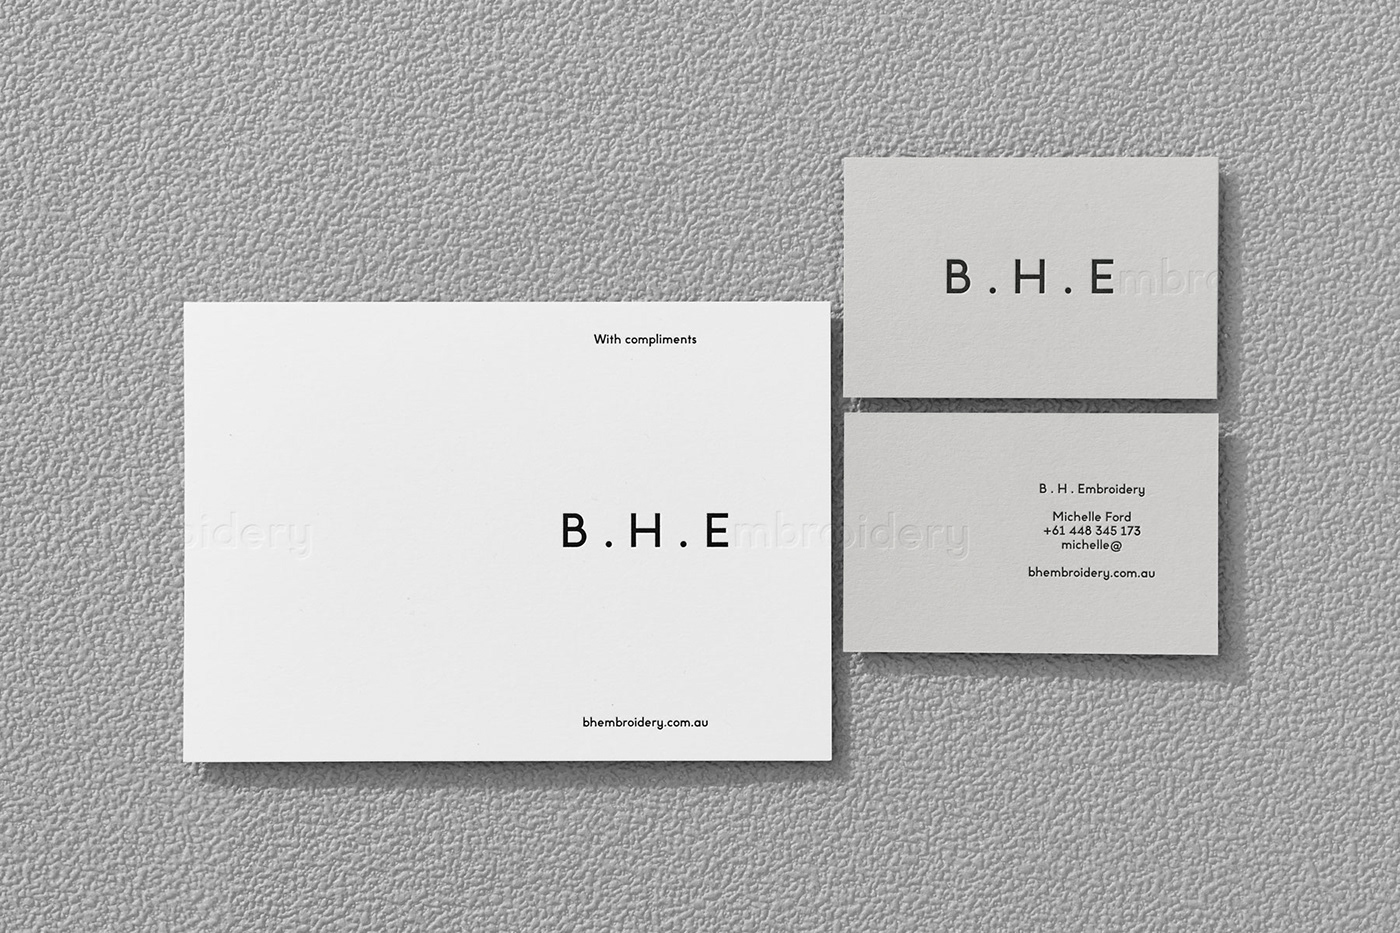 Stationery letterpress colorplan black and white grey business card letterhead With Compliments Slip emboss